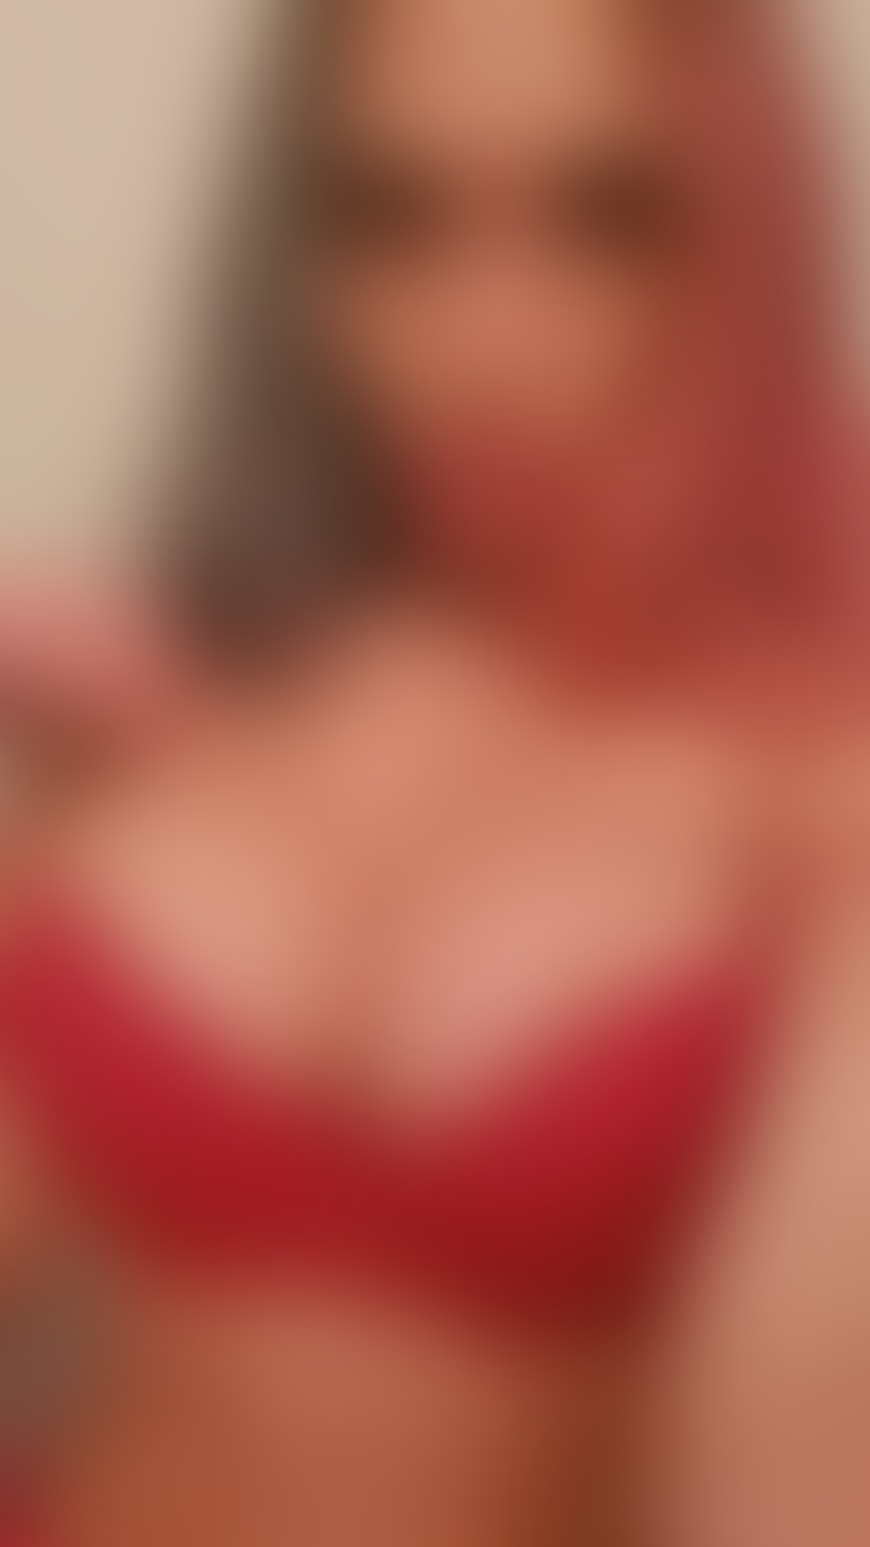 My boobs with red bra - post hidden image